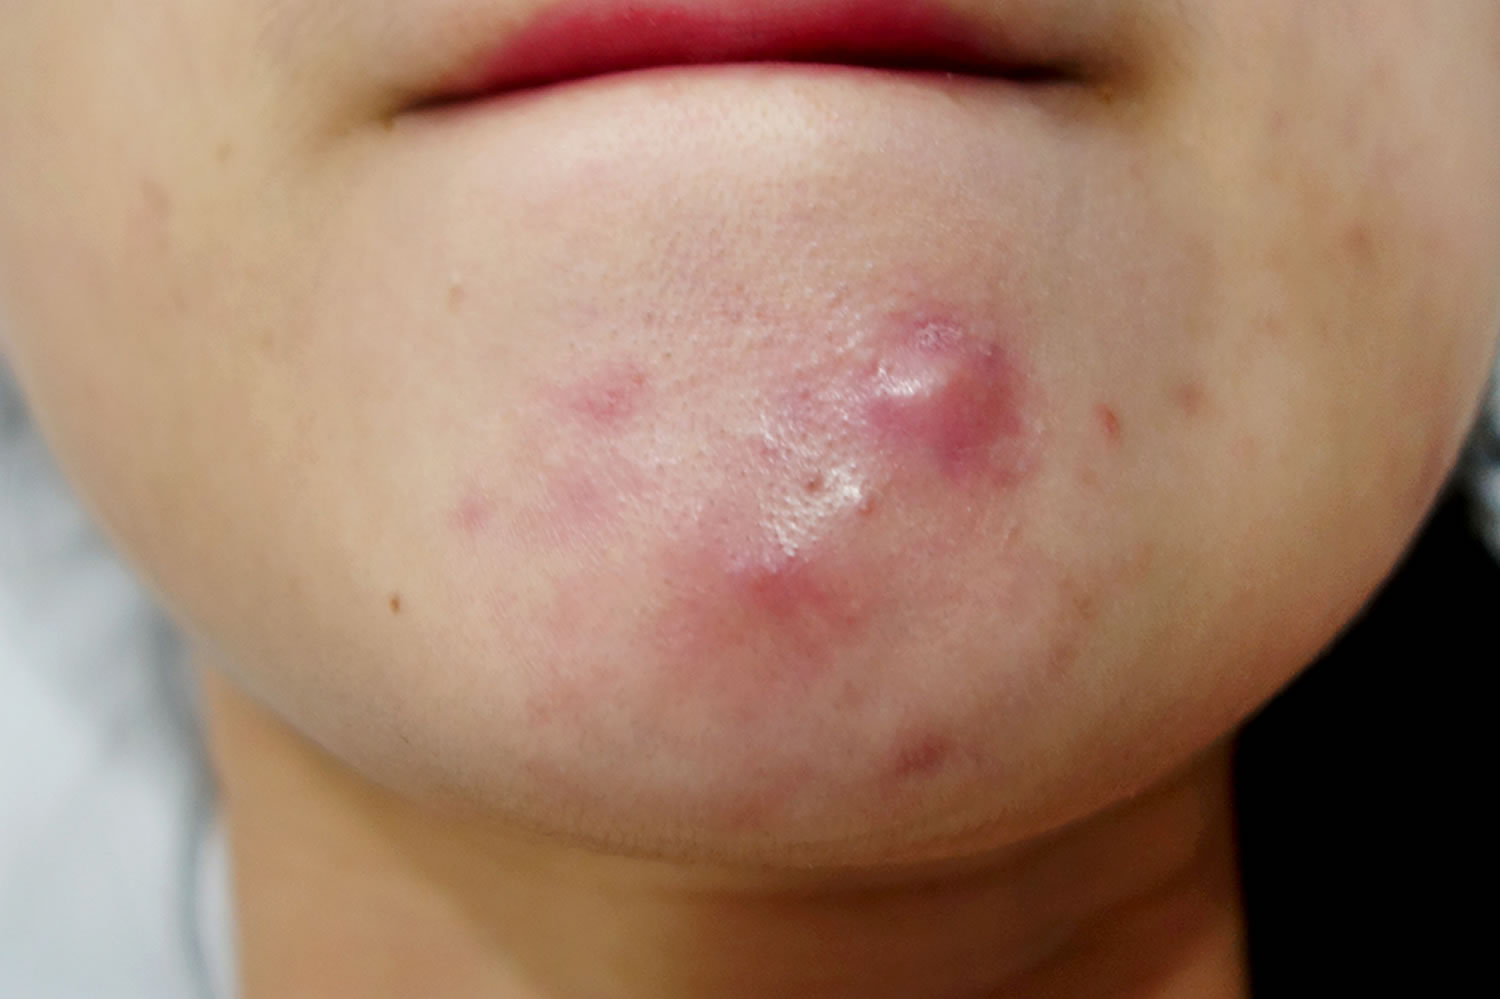 Cystic Acne Causes And Best Treatment To Get Rid Of Cystic Acne On Chin